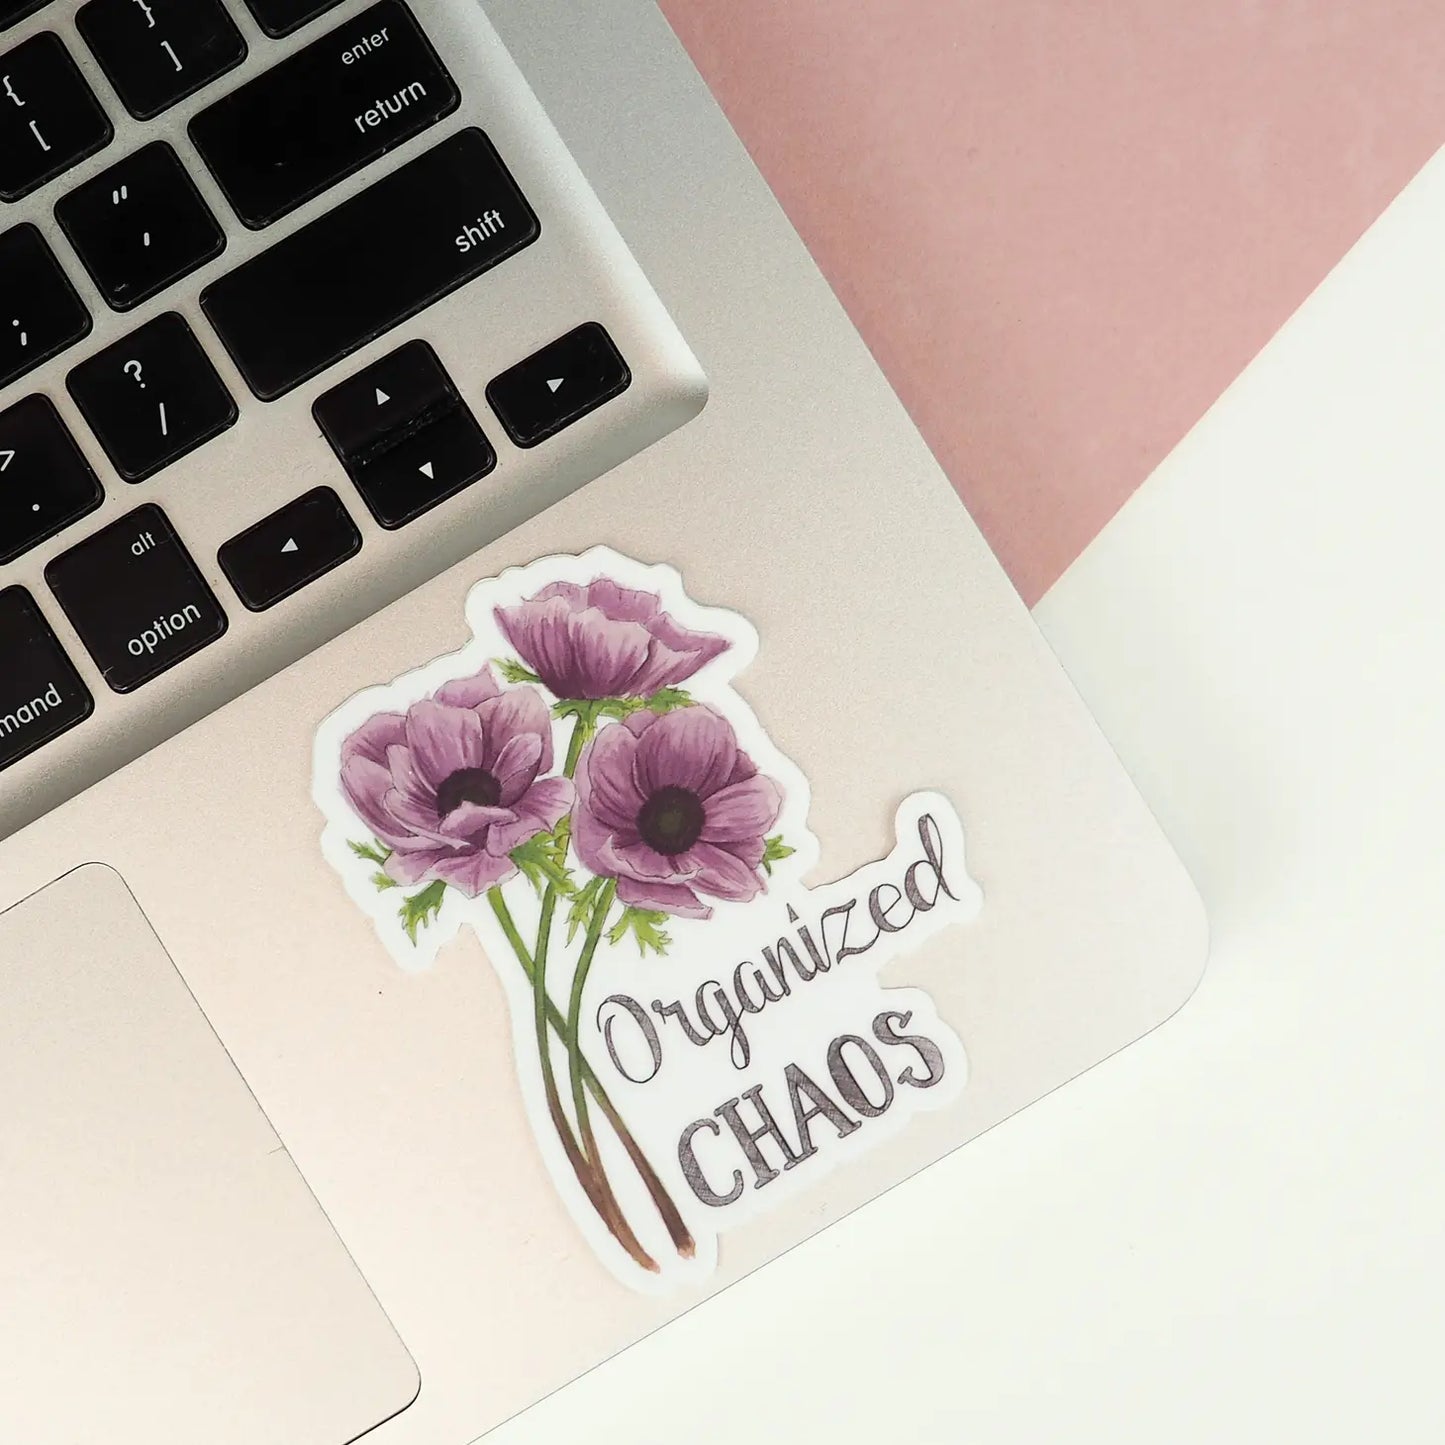 Sticker - Floral - Organized Chaos